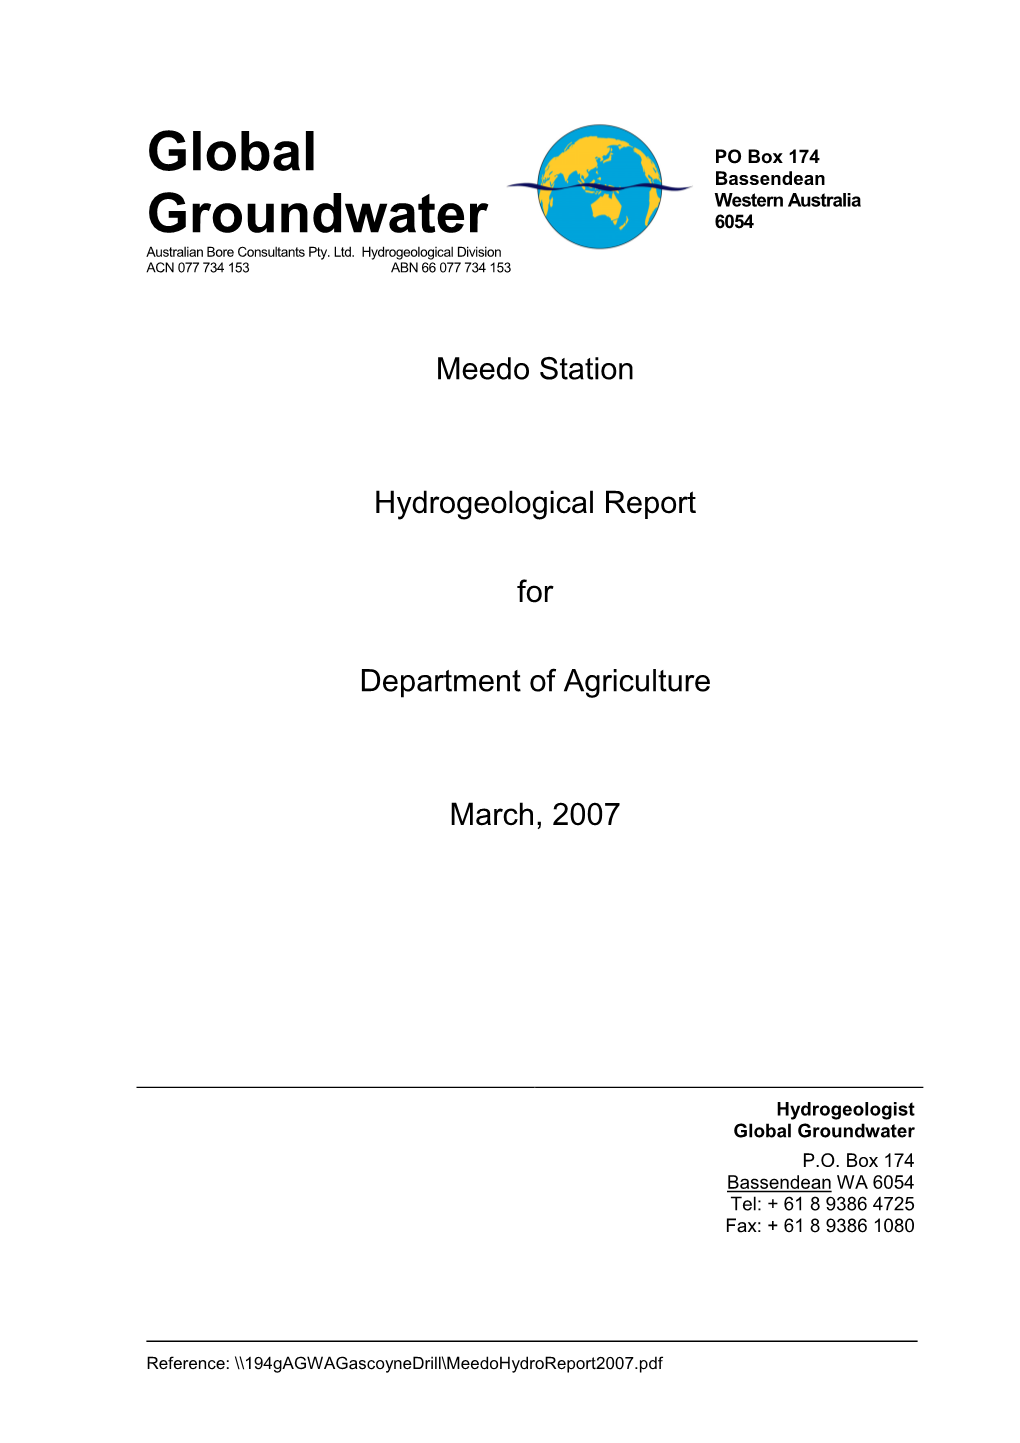 Meedo Hydrogeology Report for Department of Agriculture and Food, W